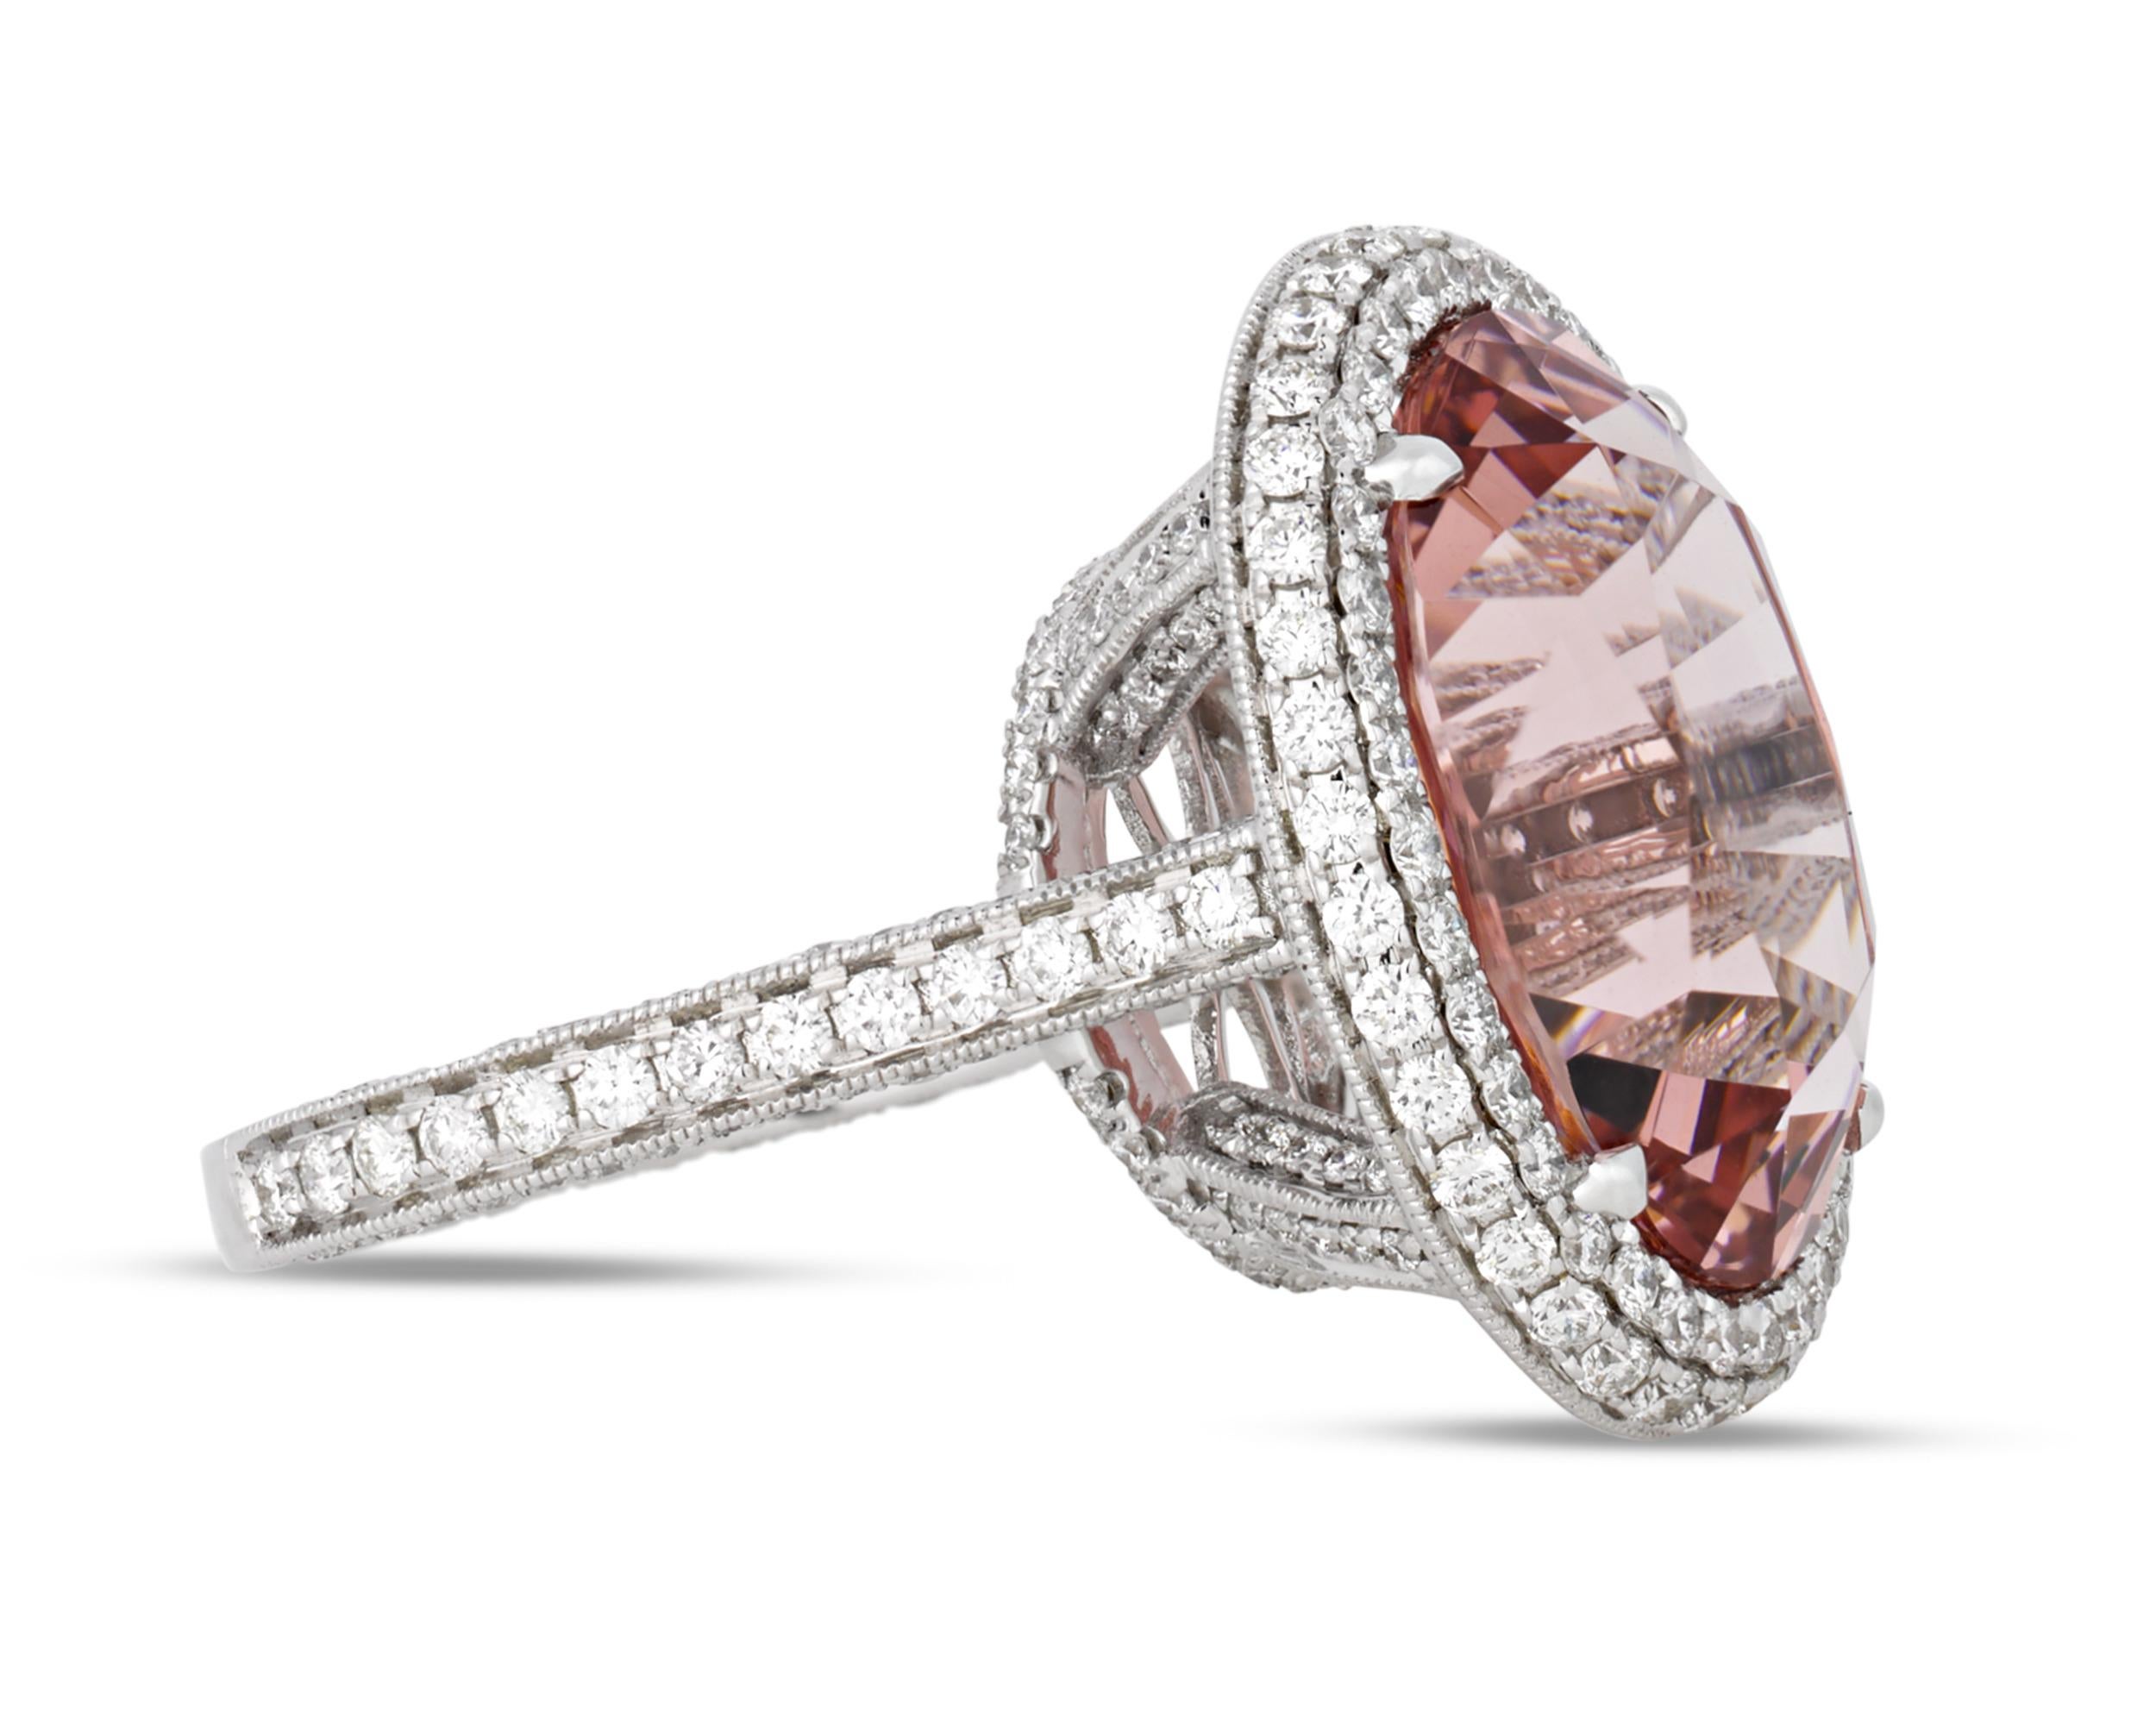 This stunningly romantic ring features a peachy morganite weighing 12.74 carats encircled by a halo of white diamonds totaling 1.69 carats. After morganite's discovery in Madagascar in 1910, Tiffany & Co. introduced this gem to the American market,